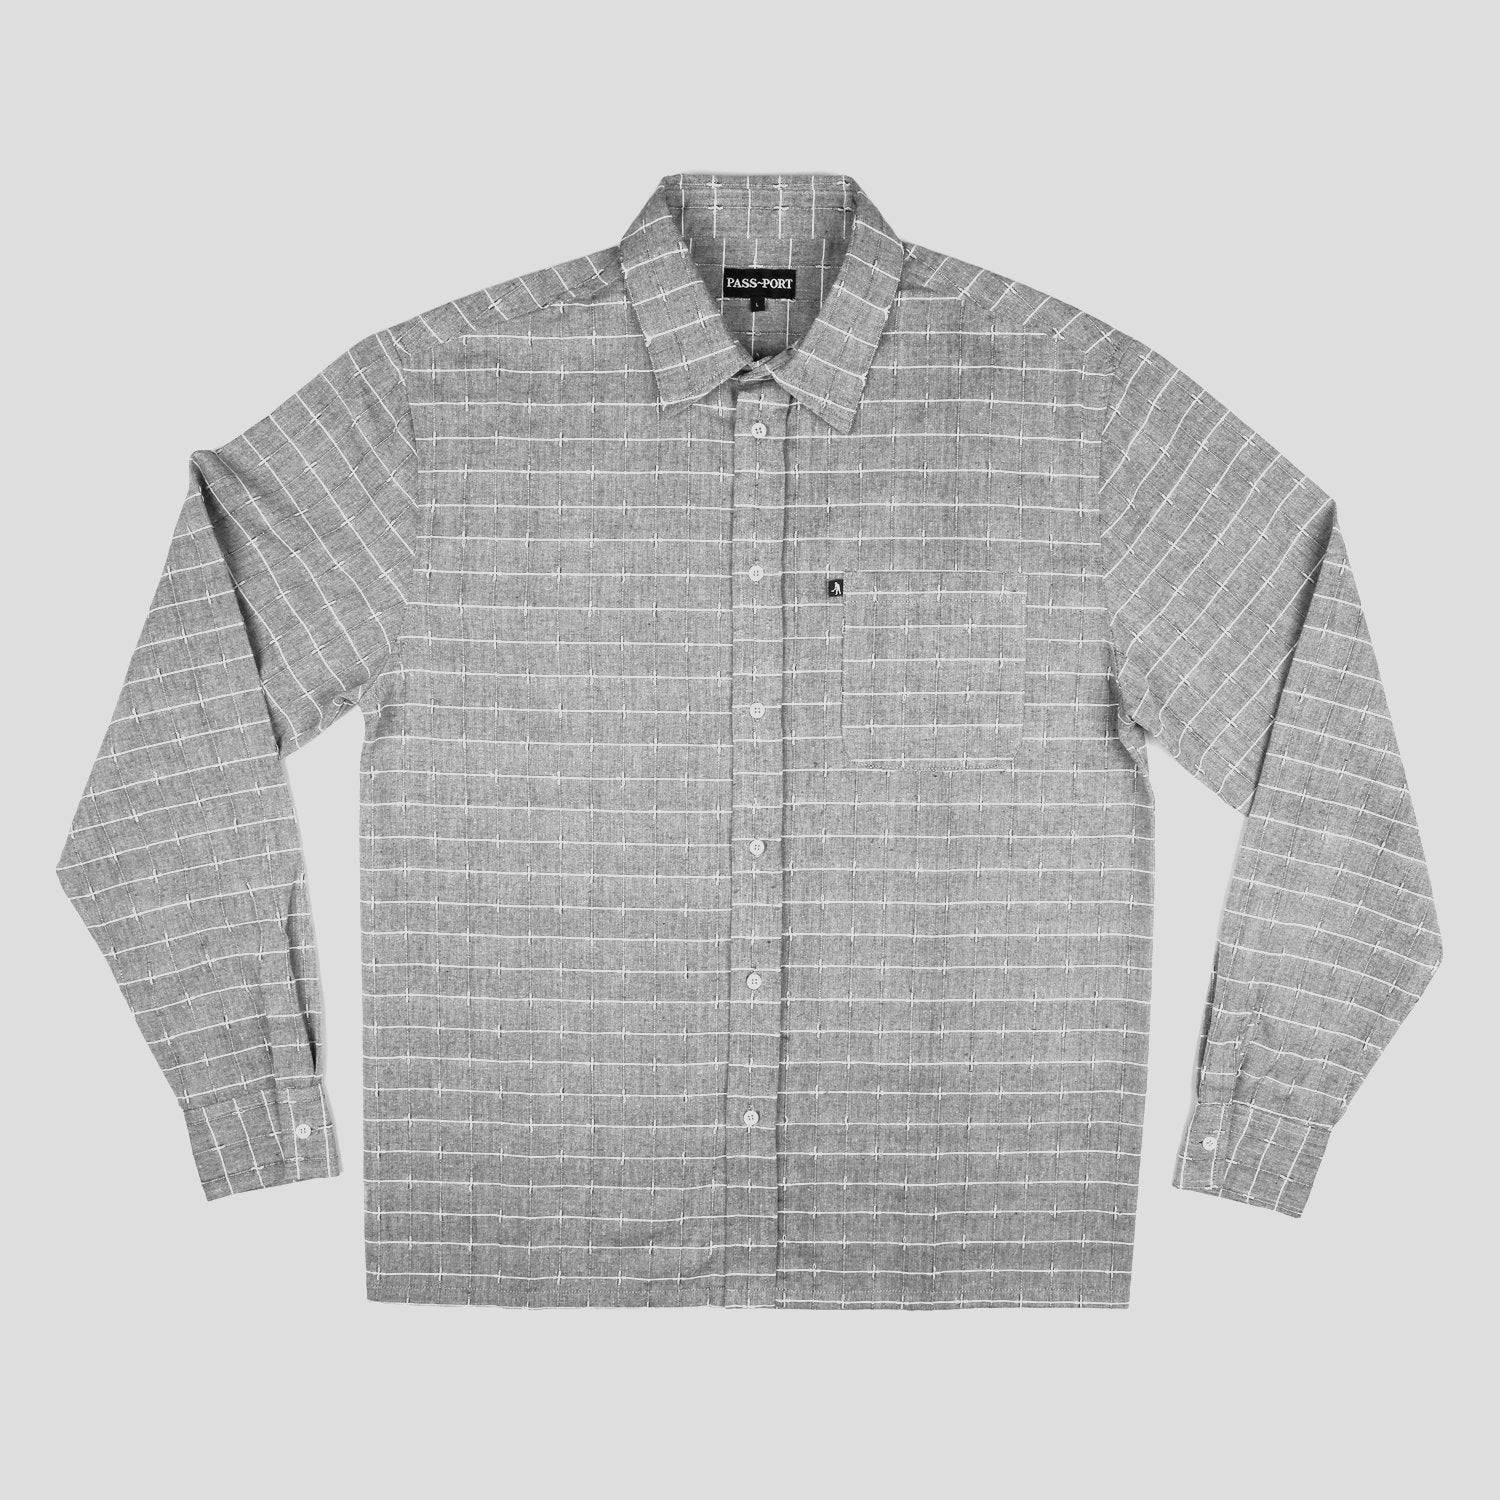 PASS~PORT "WORKERS LINE WIRE" L/S SHIRT GREY